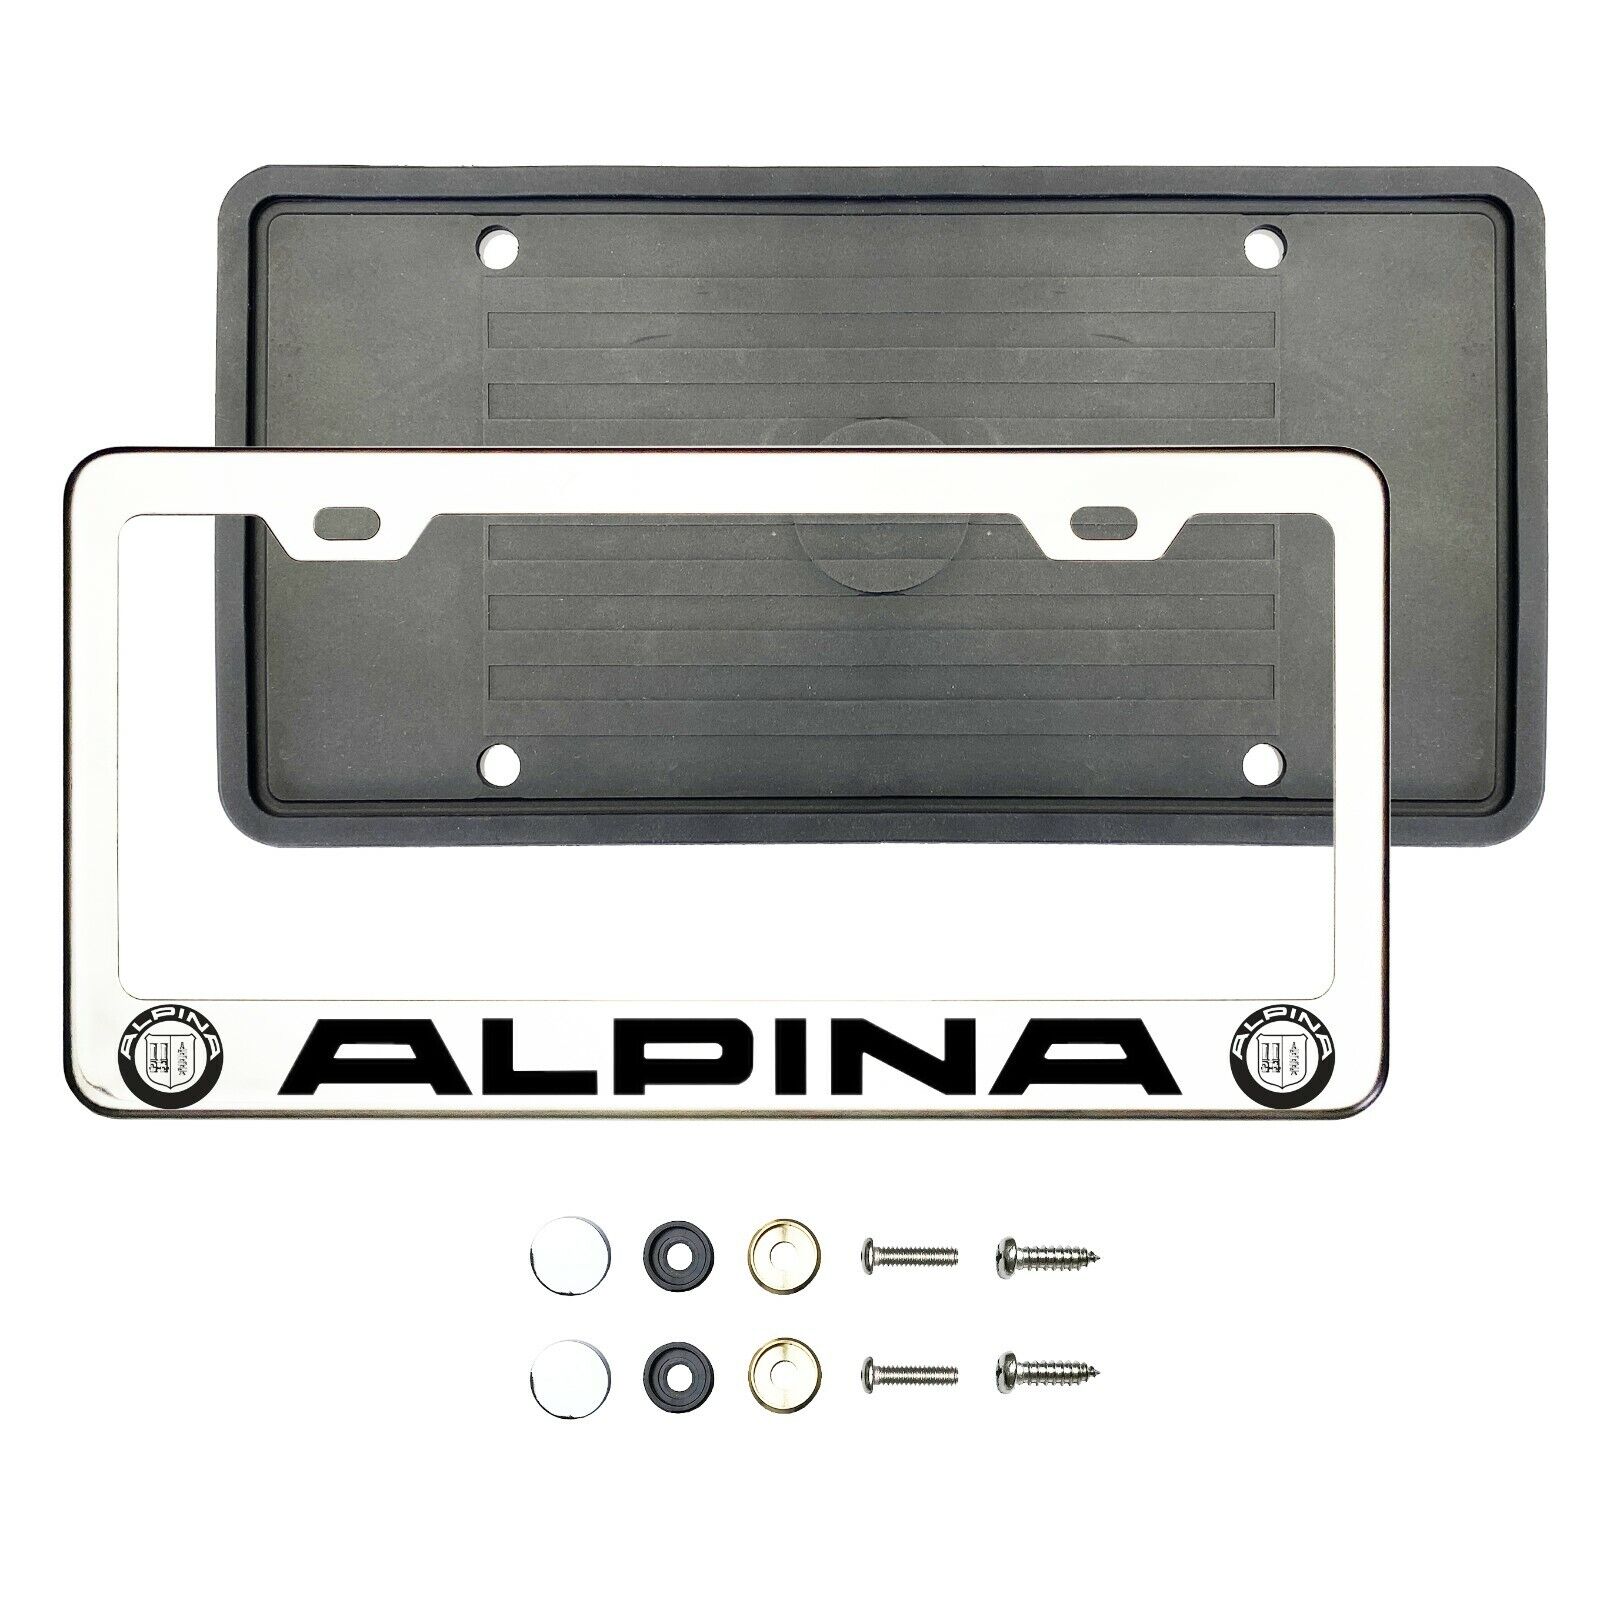 Alpina Black Laser Etched Chrome Stainless Steel License Frame Silicone Guard